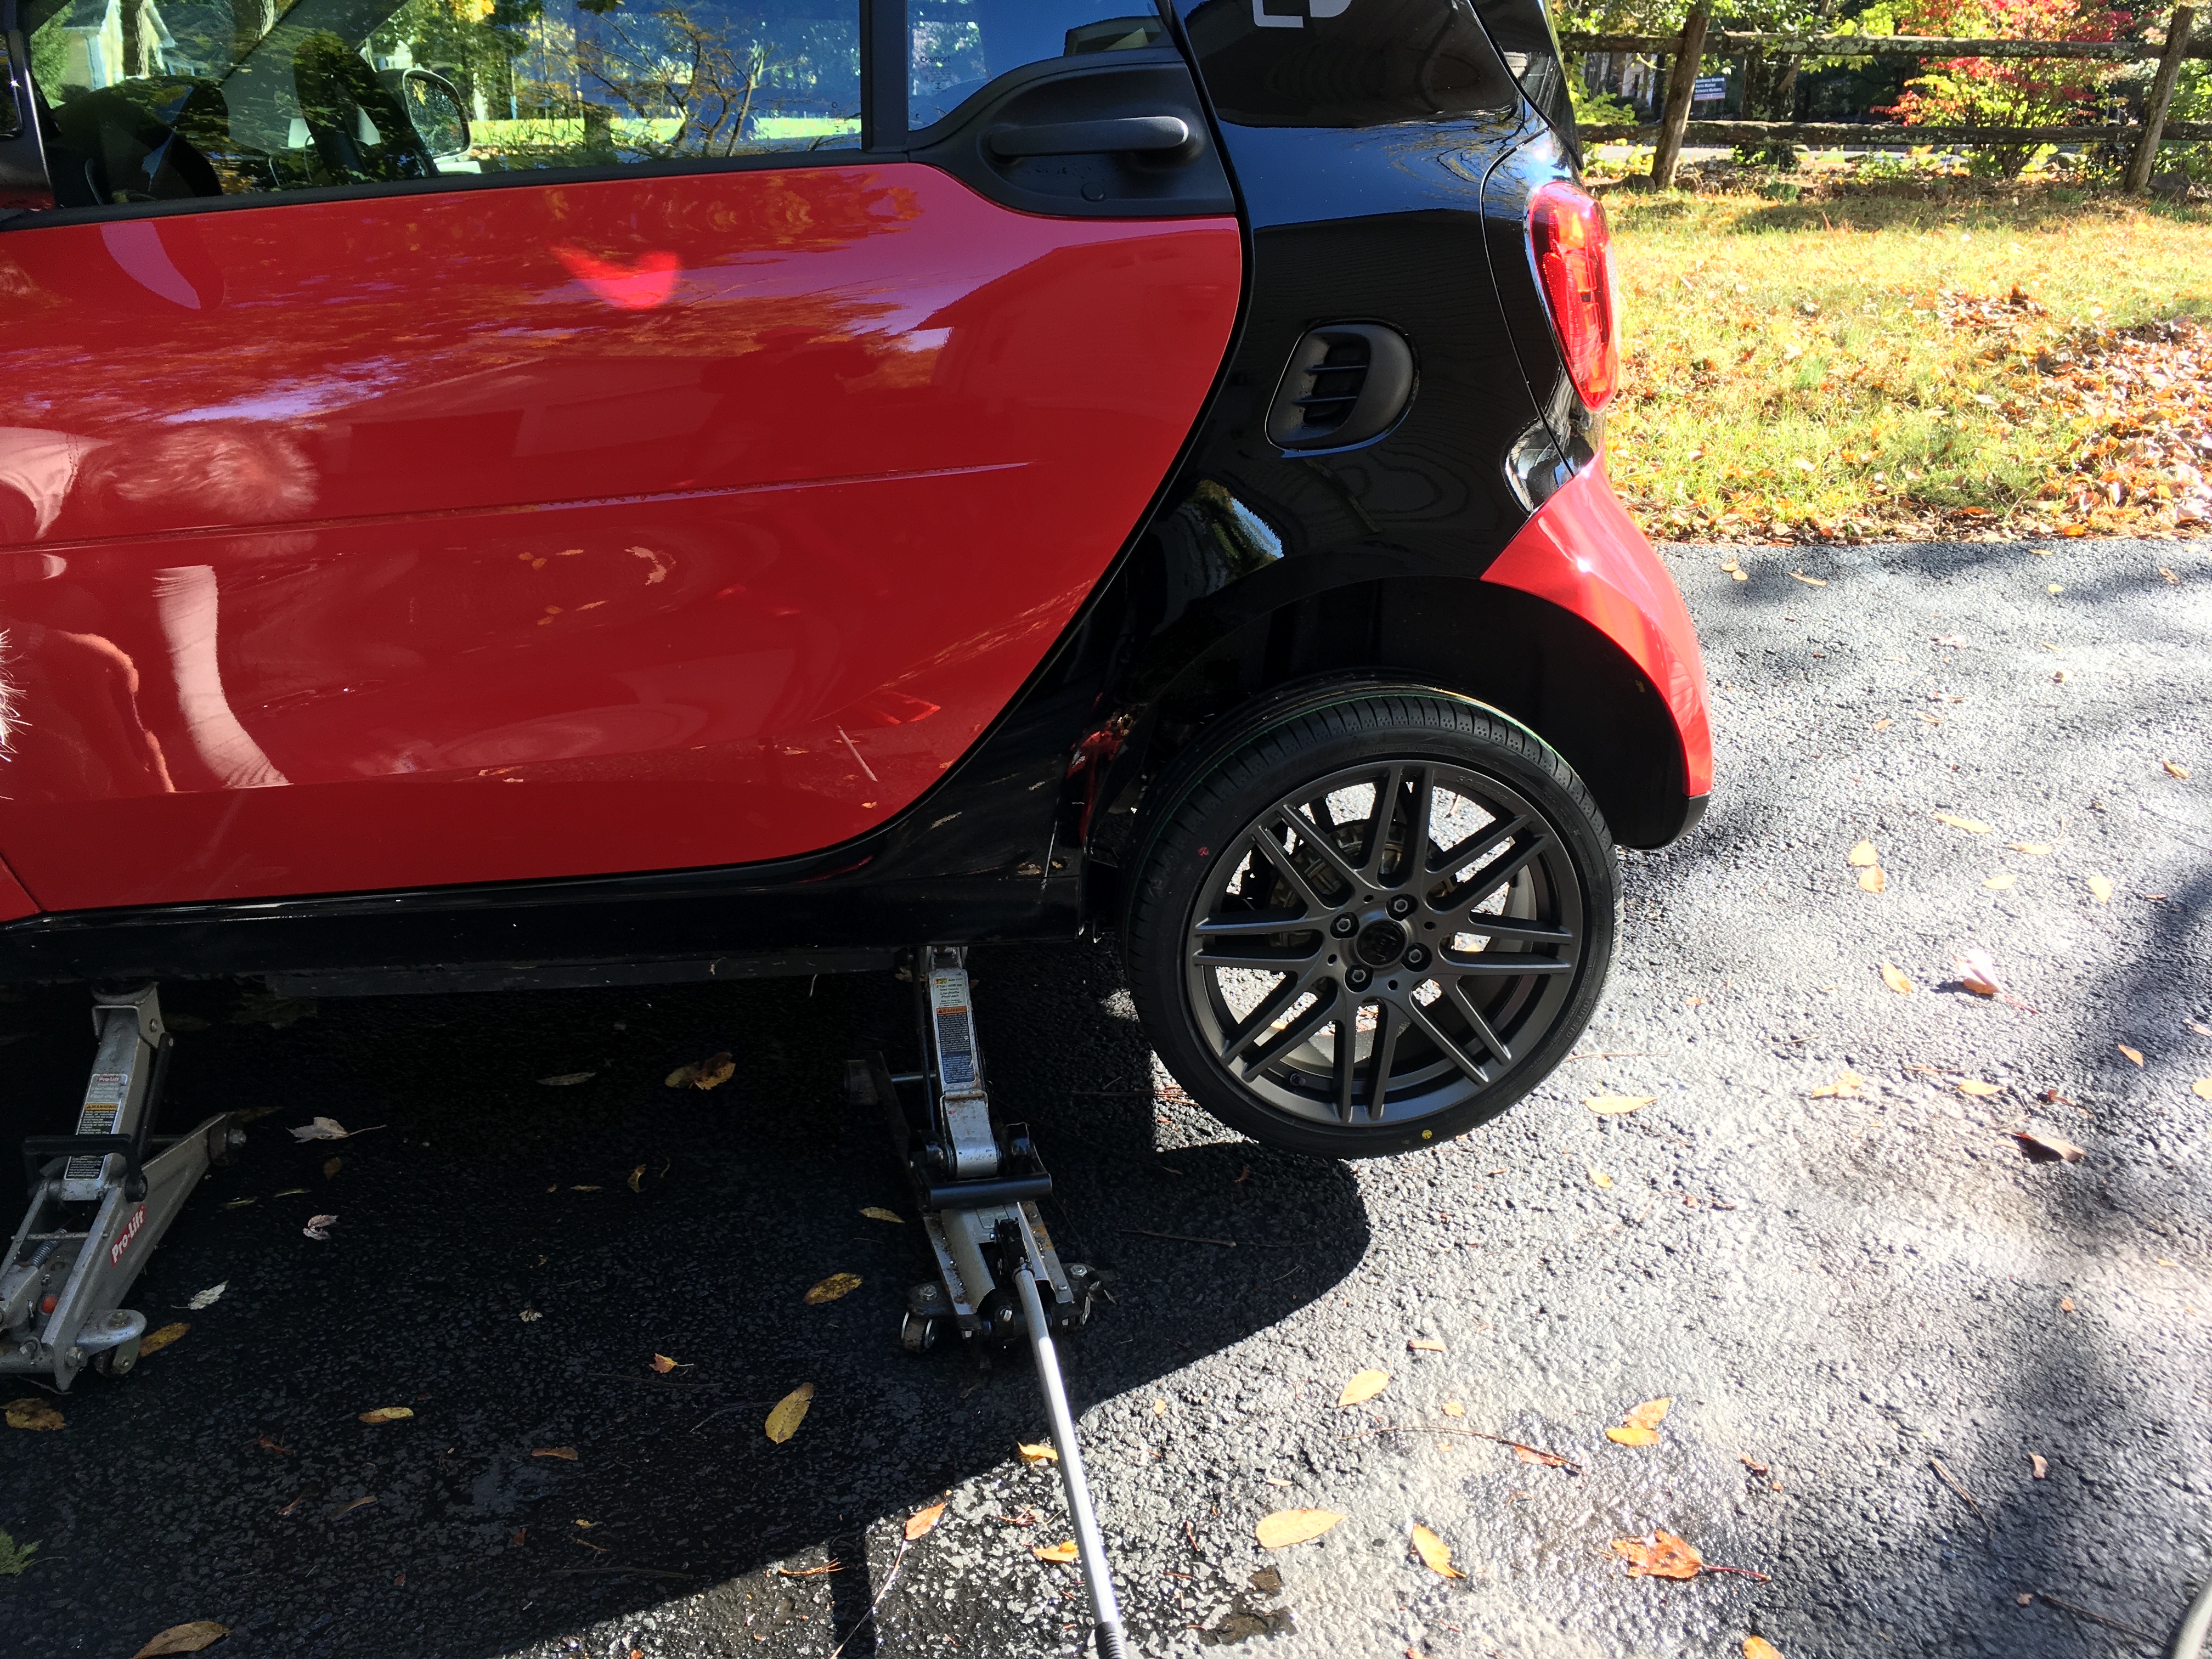 New wheels on the Smart ED